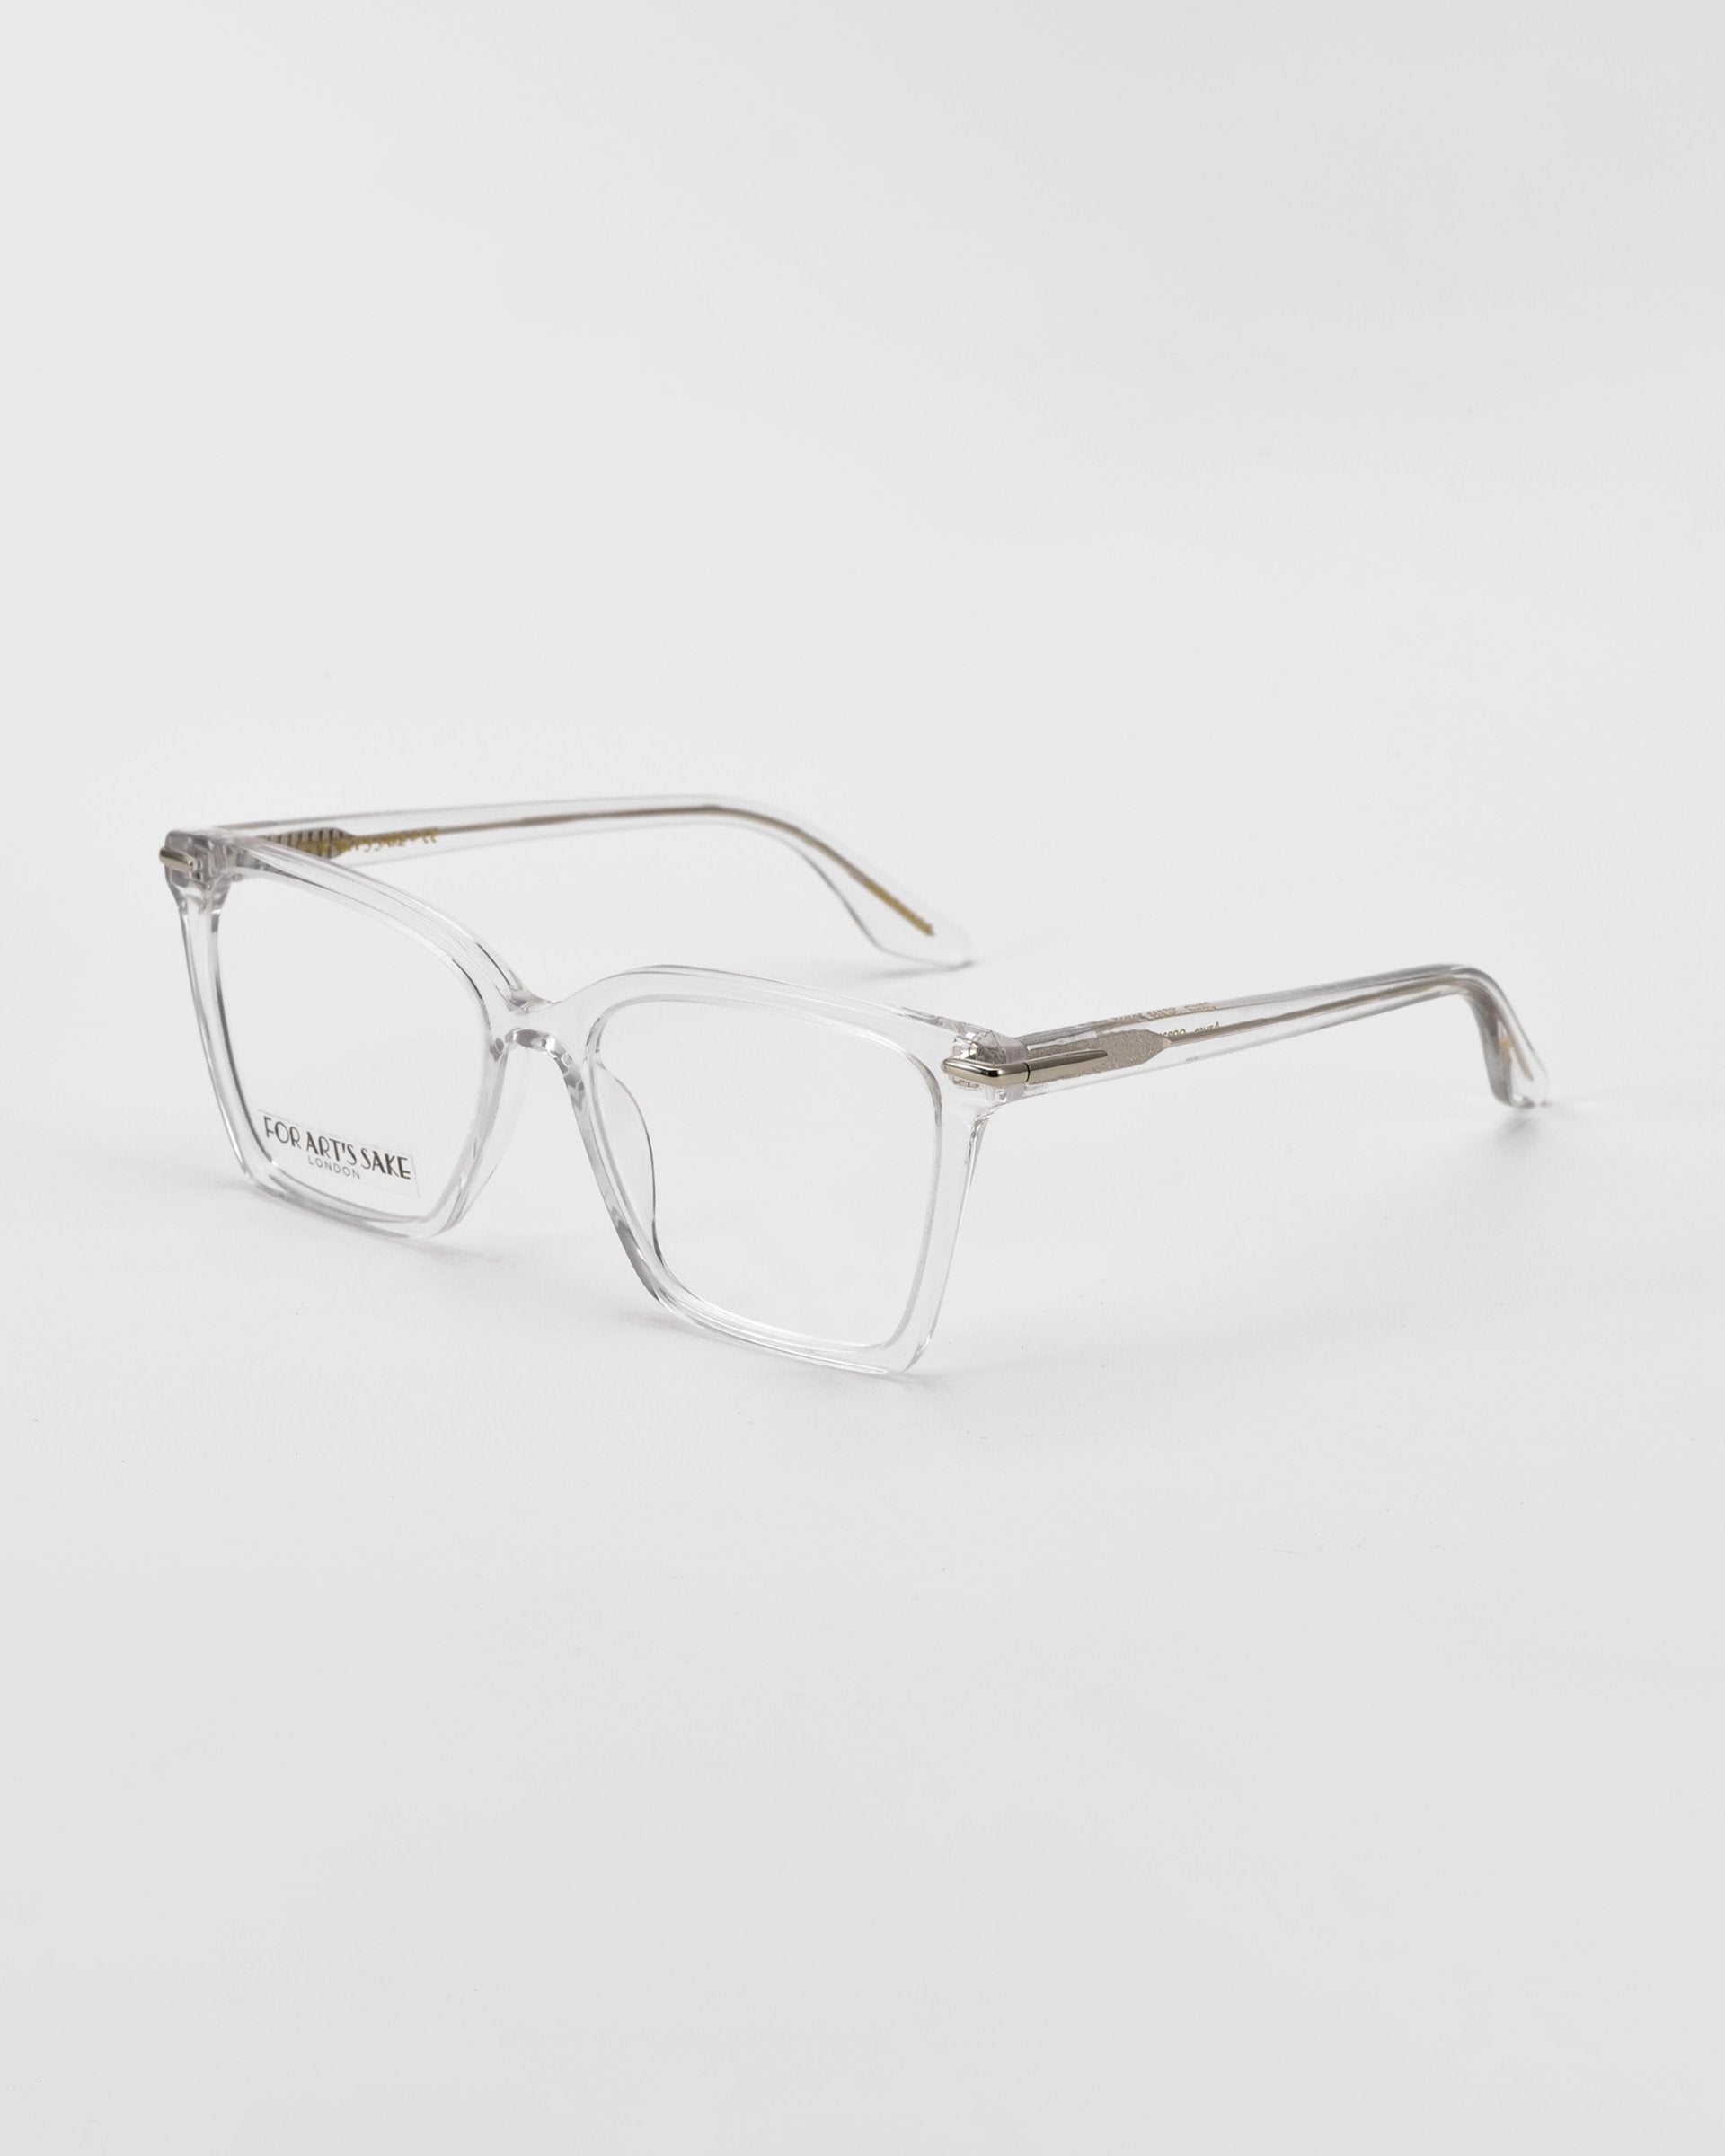 Clear rectangular optical glasses facing sideways on a white background. 